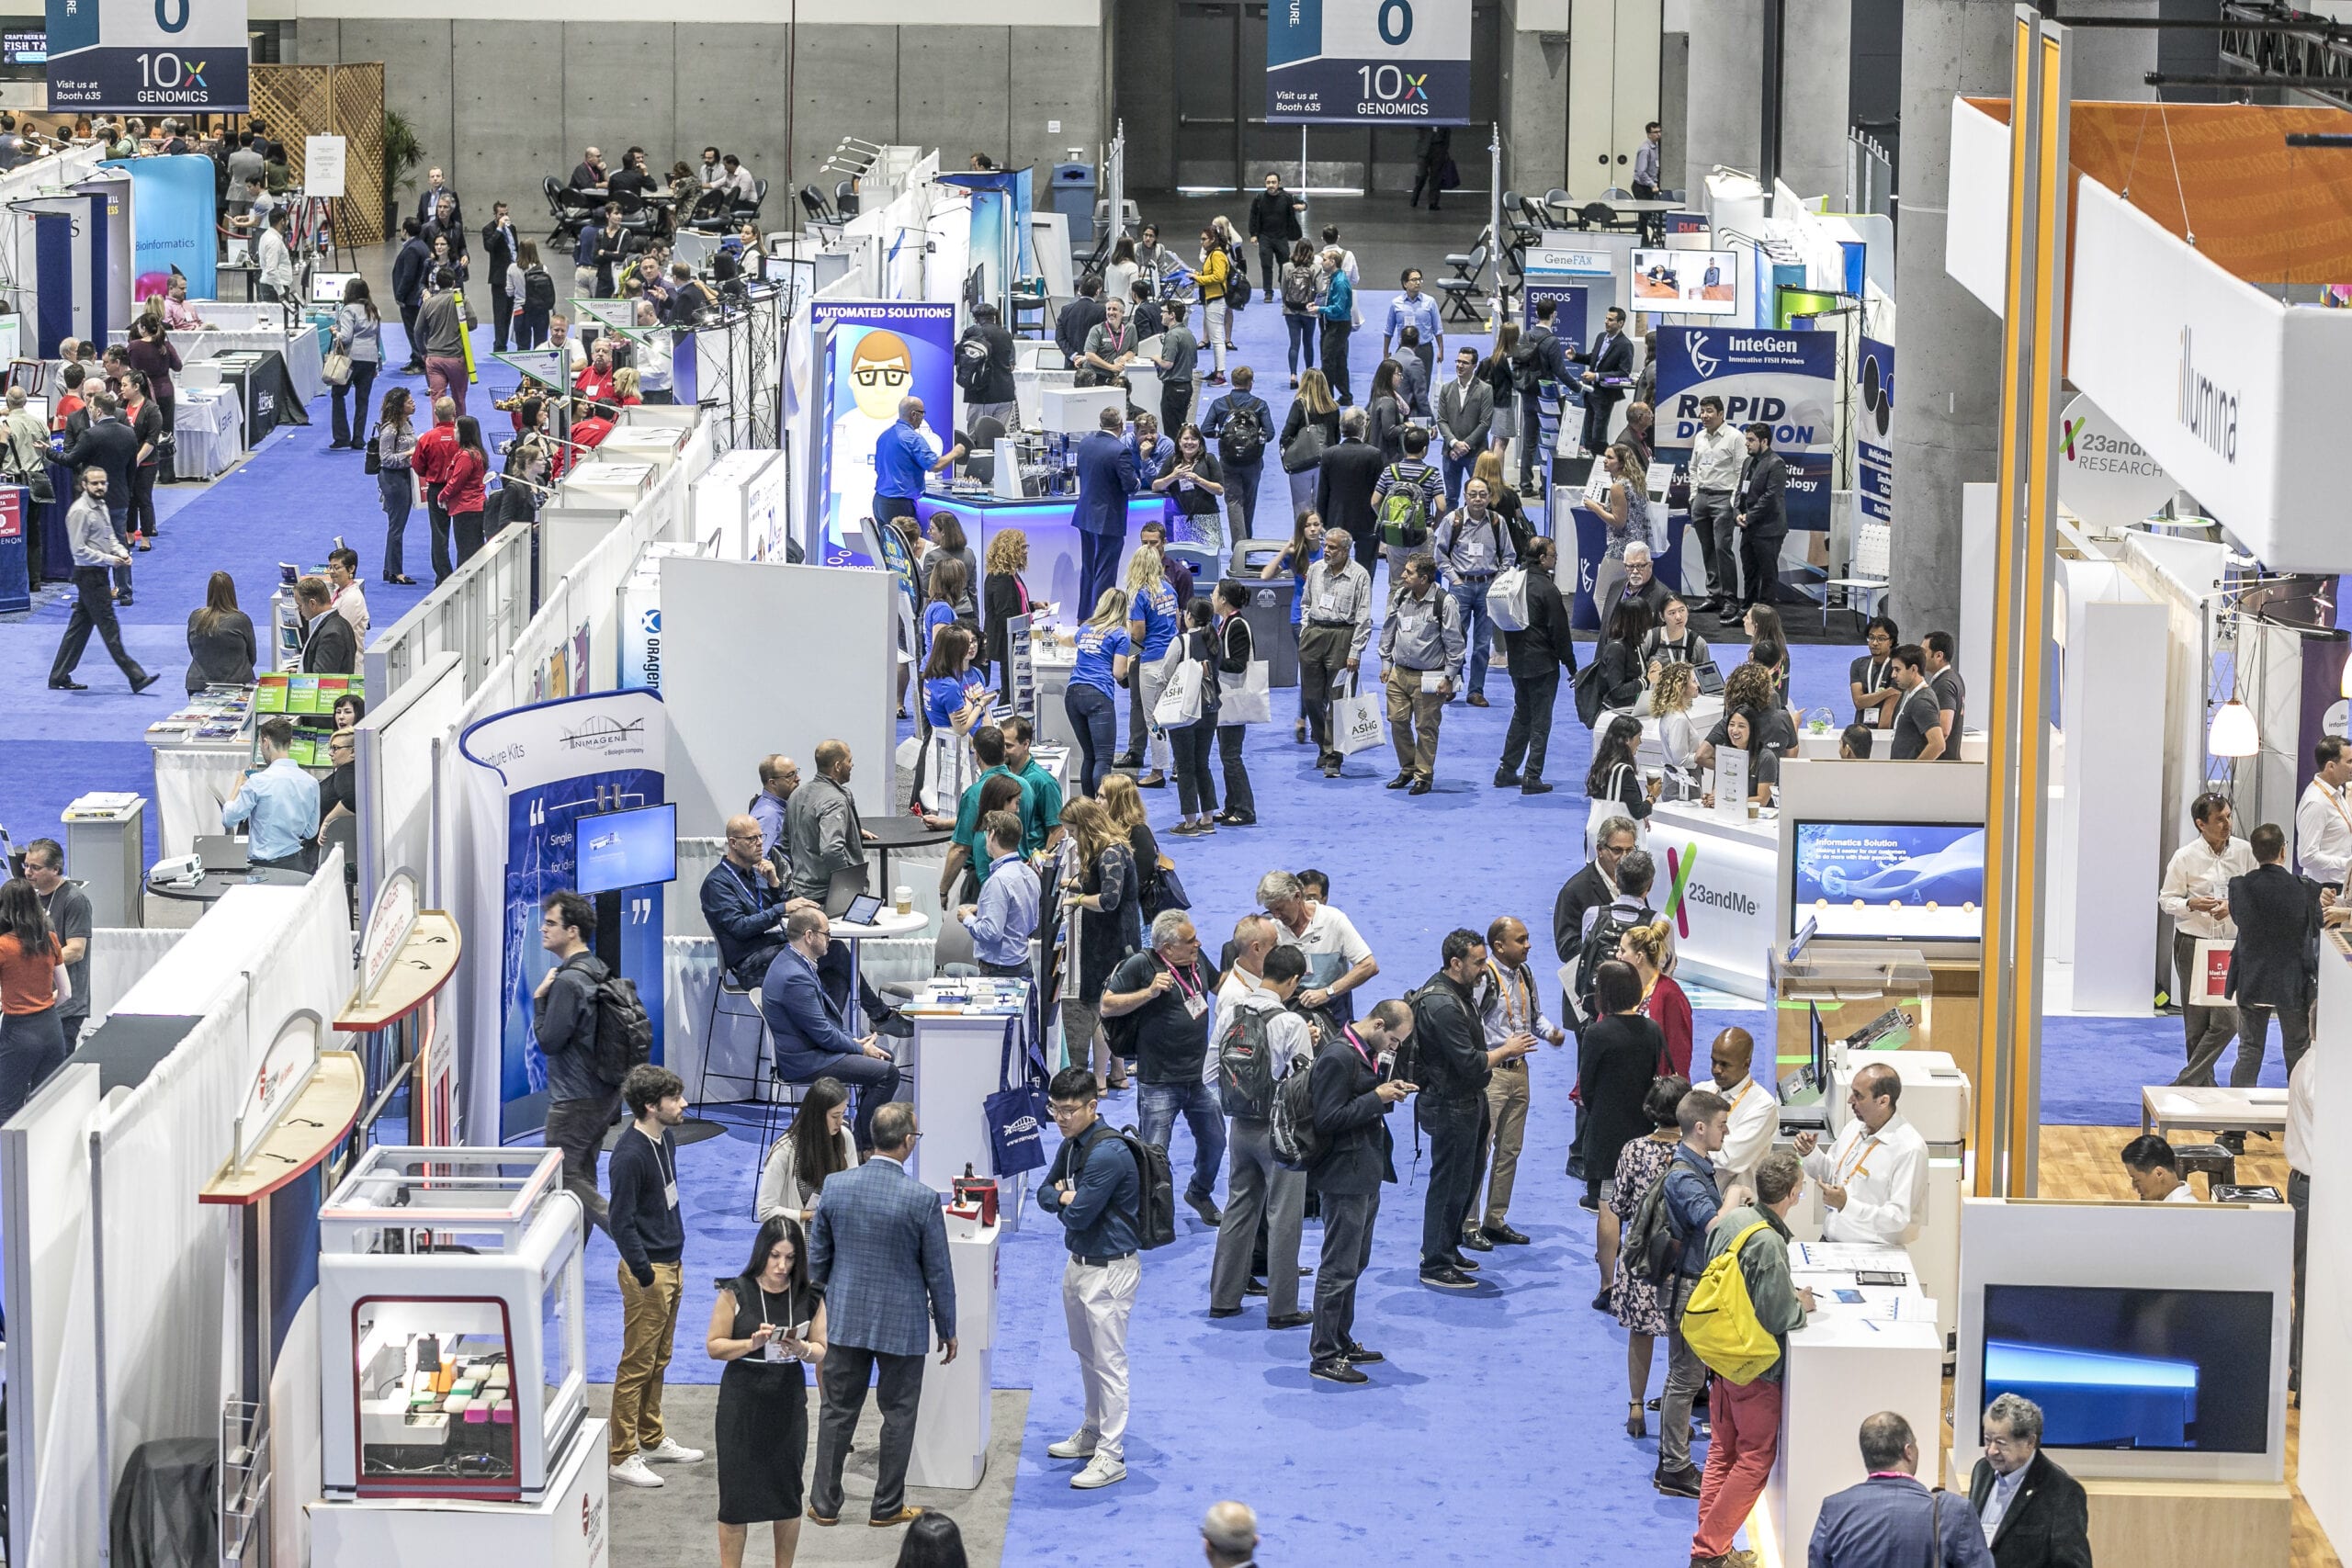 Interactive Exhibits, CoLabs, and More ASHG